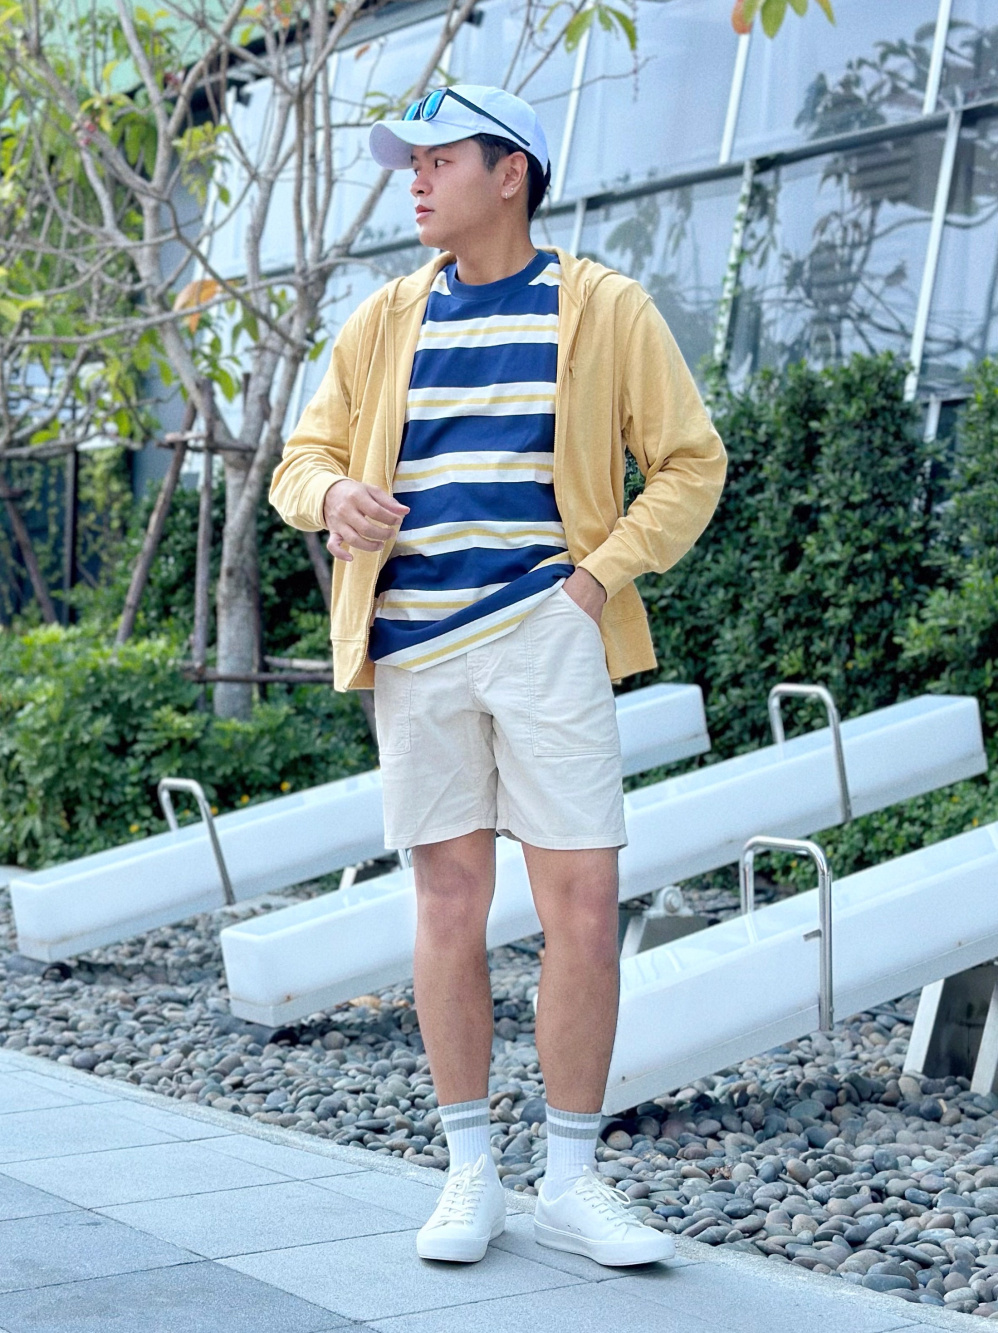 Check styling ideas for「Chino Shorts (length 21 - 25 cm)*、Canvas